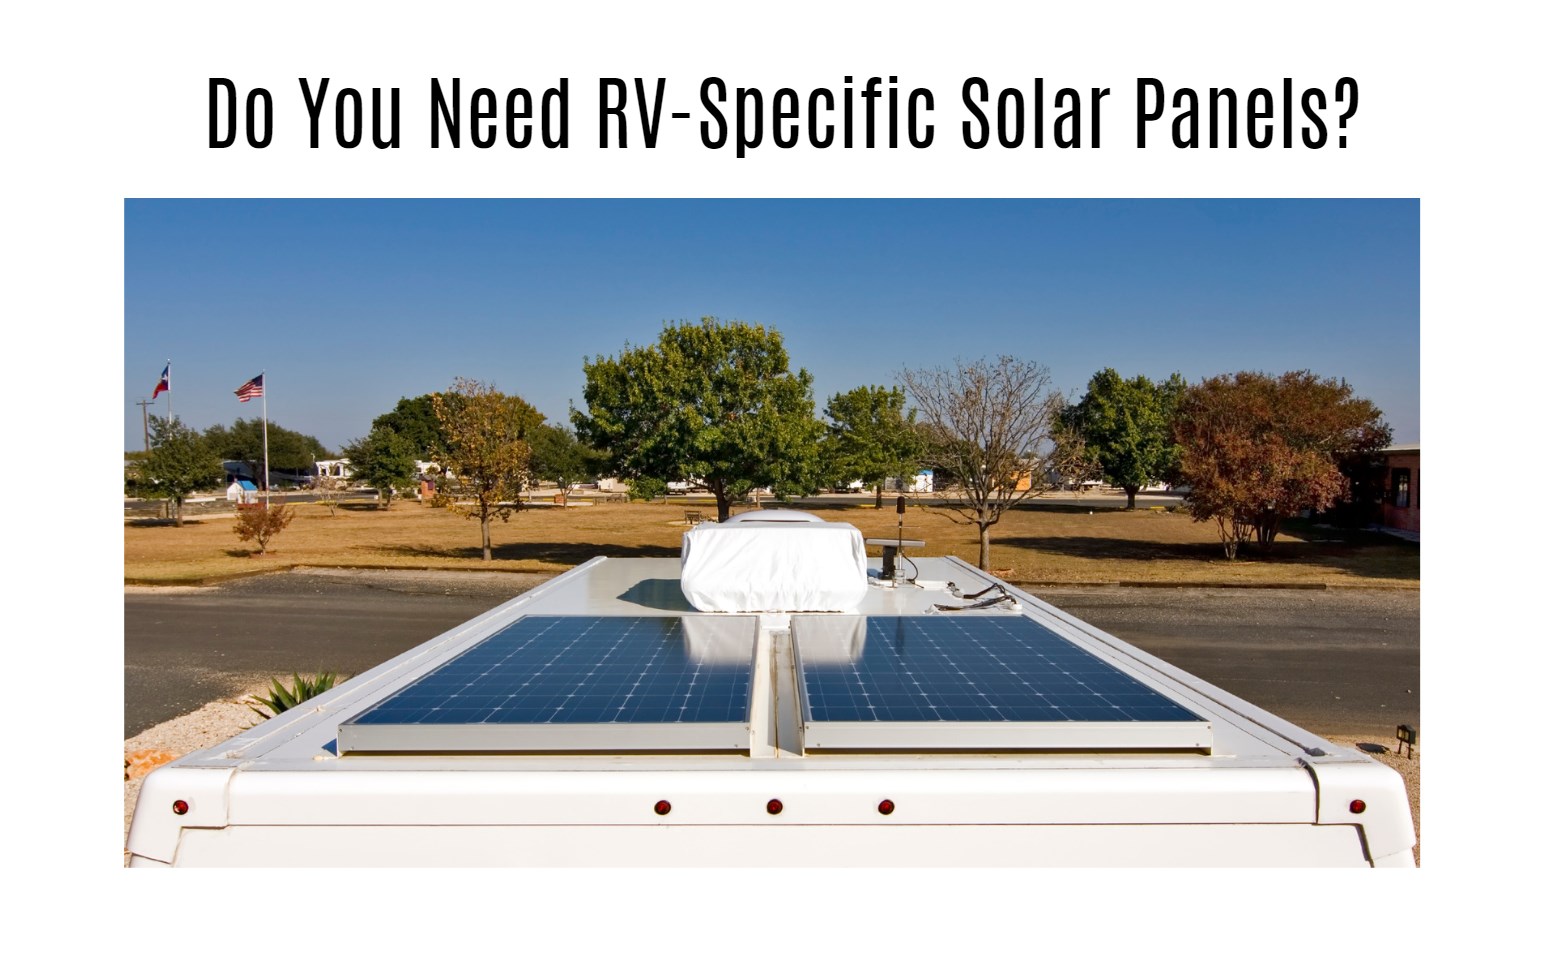 Do You Need RV-Specific Solar Panels?